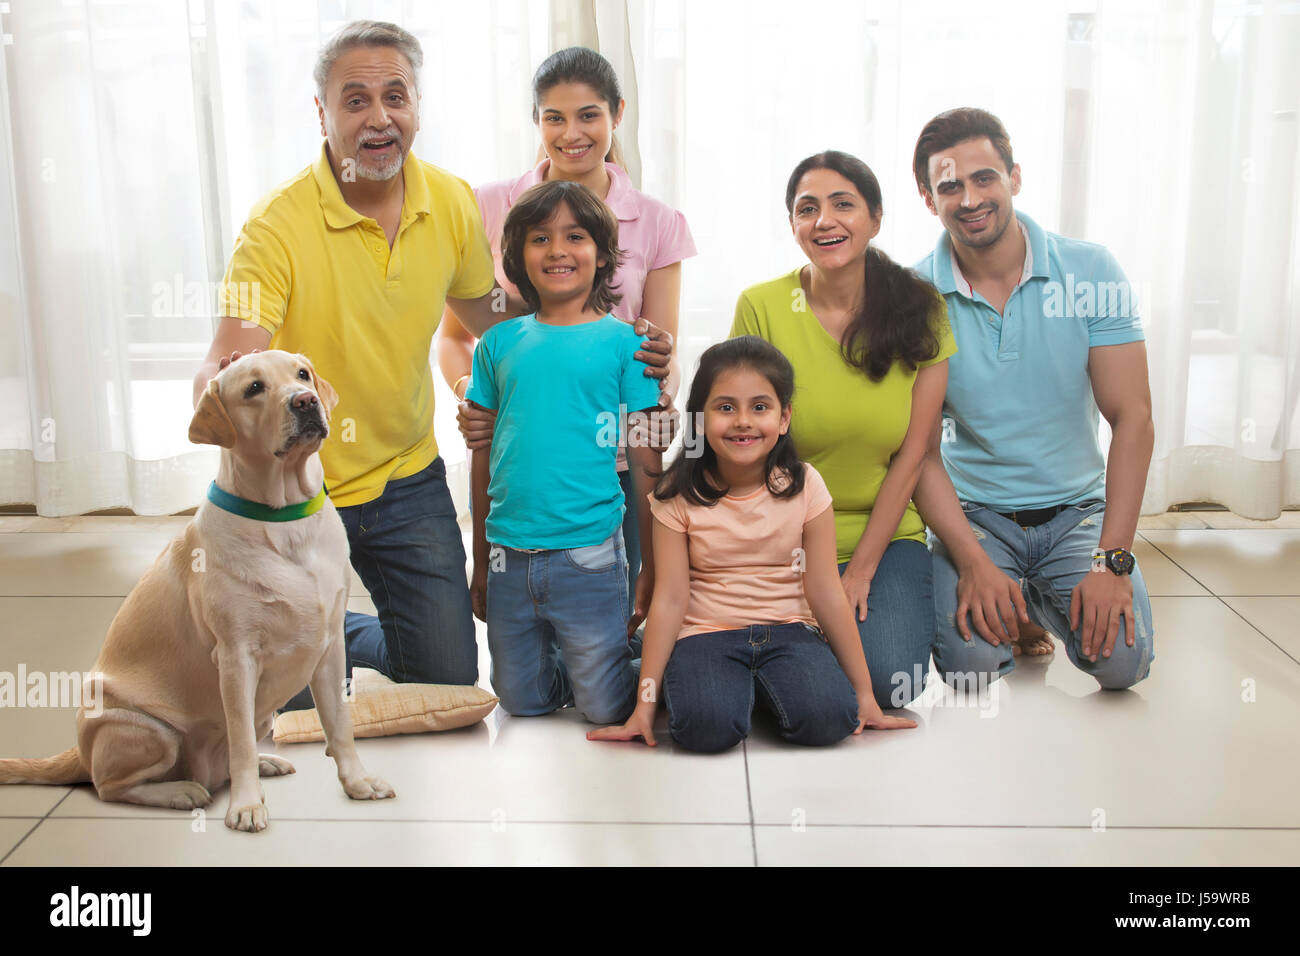 Portrait of multi-generation family with dog kneeling on wooden floor Stock Photo